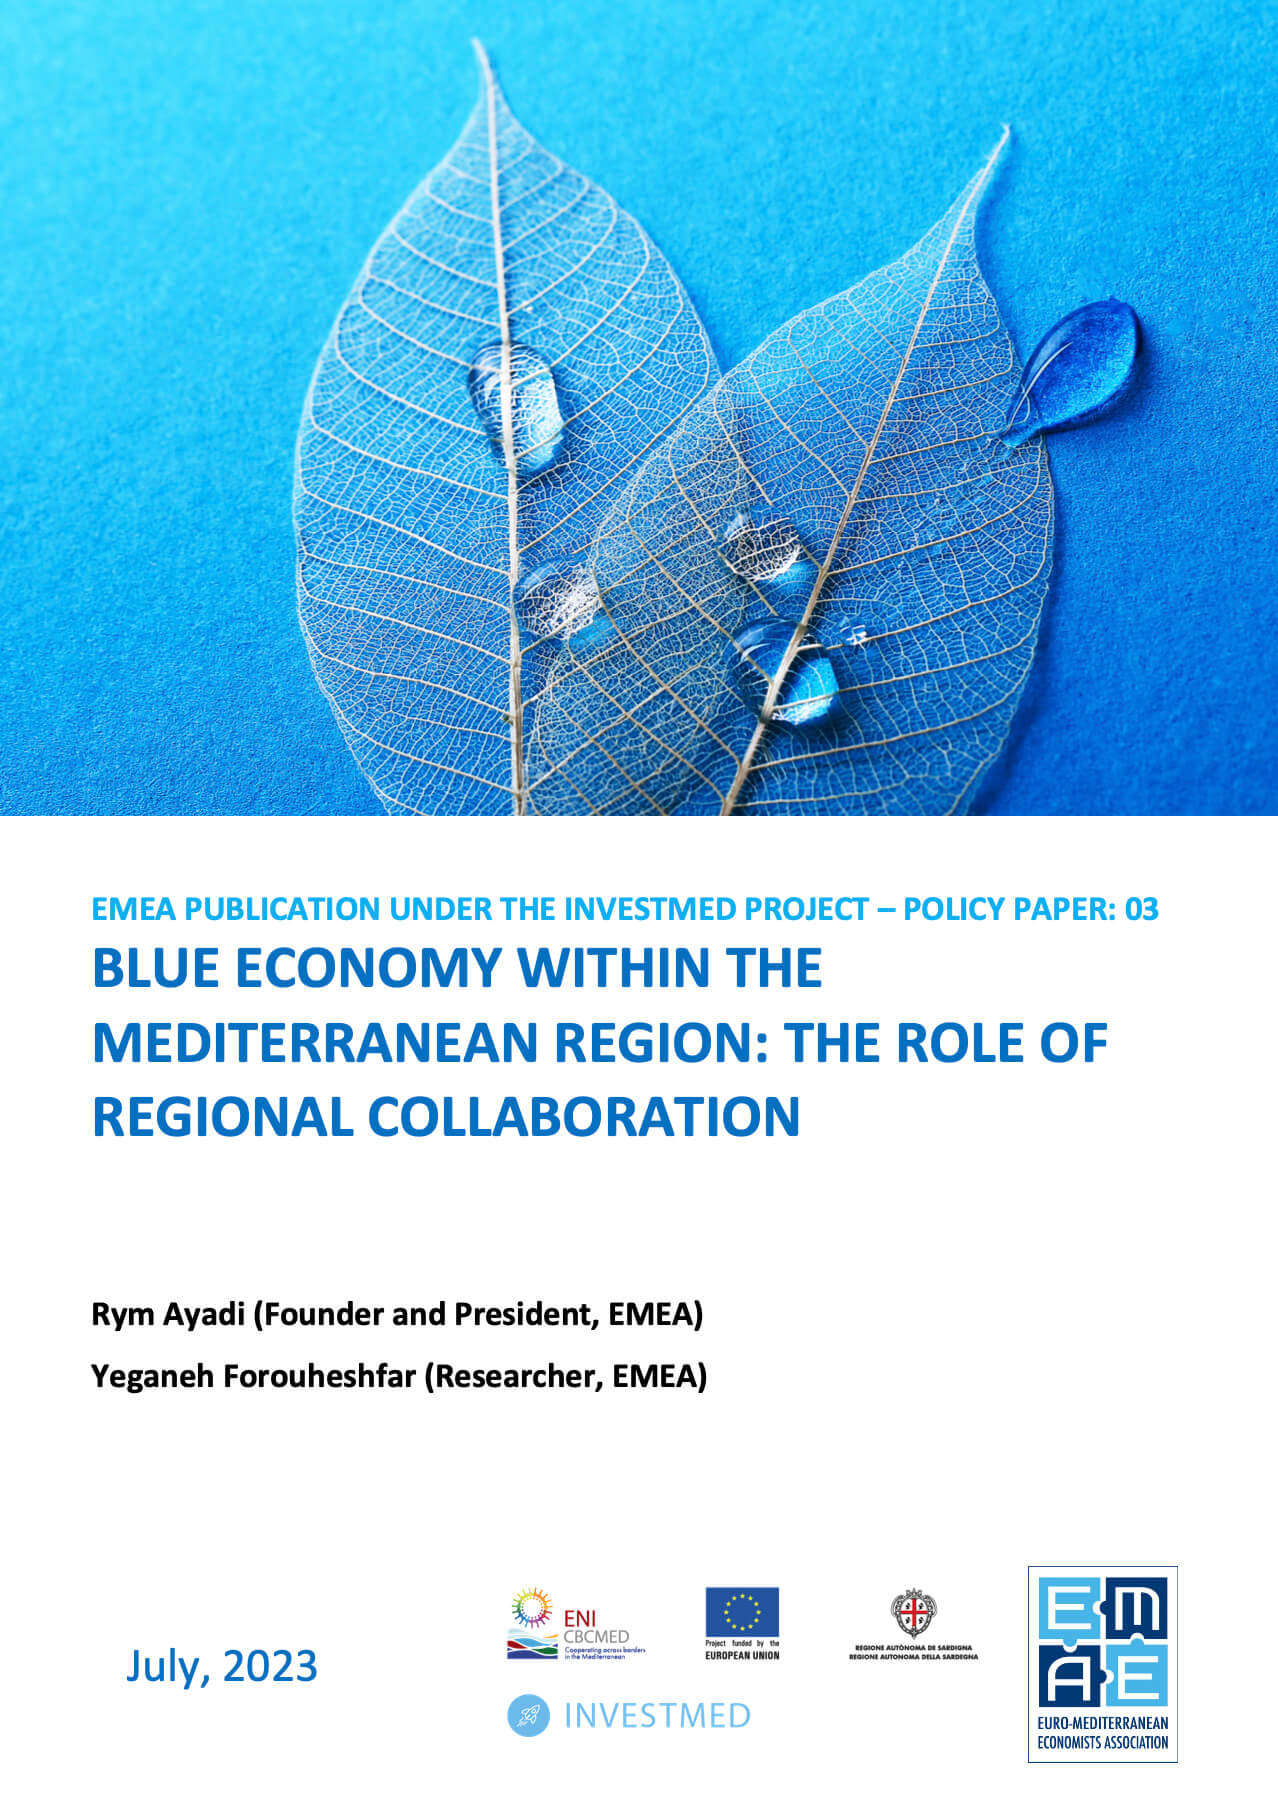 Blue economy within the Mediterranean region: the role of regional